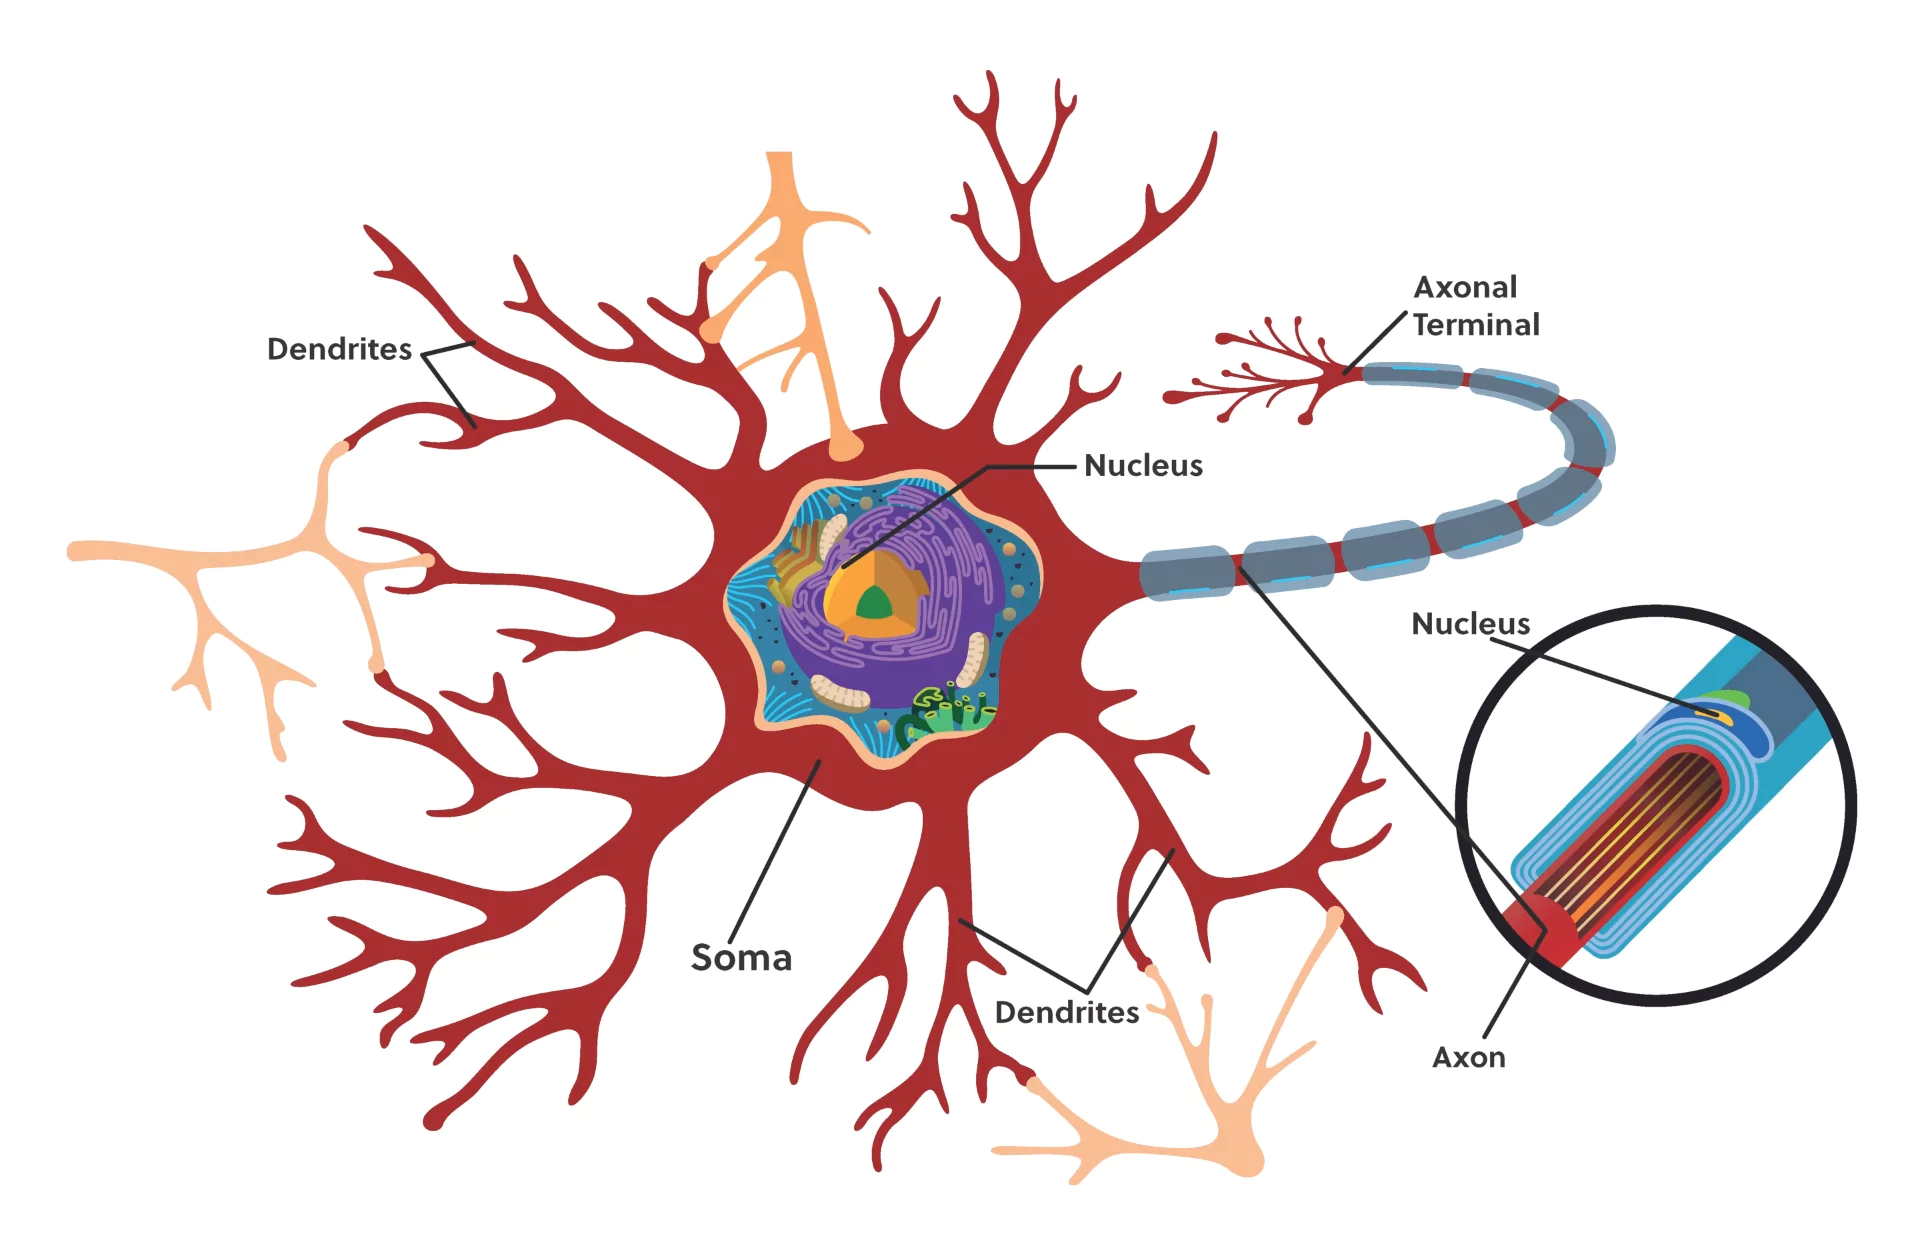 Illustration of a neuron showing dendrites extending from the soma, a nucleus inside the soma, and an axon with an enlarged view of its cross-section showing internal structures.